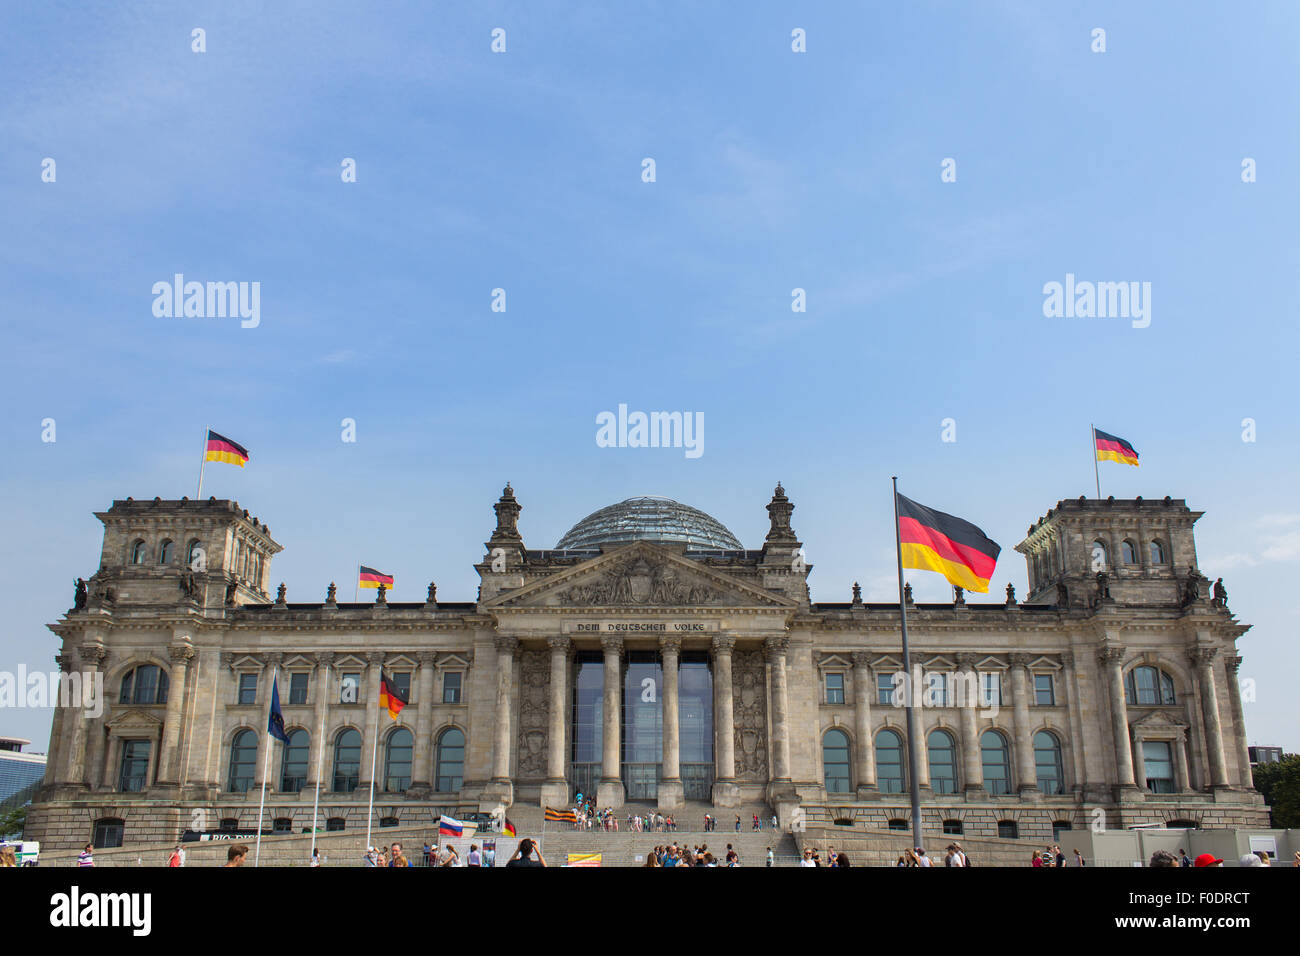 German parliament - The Reichstag building, berlin germany Stock Photo